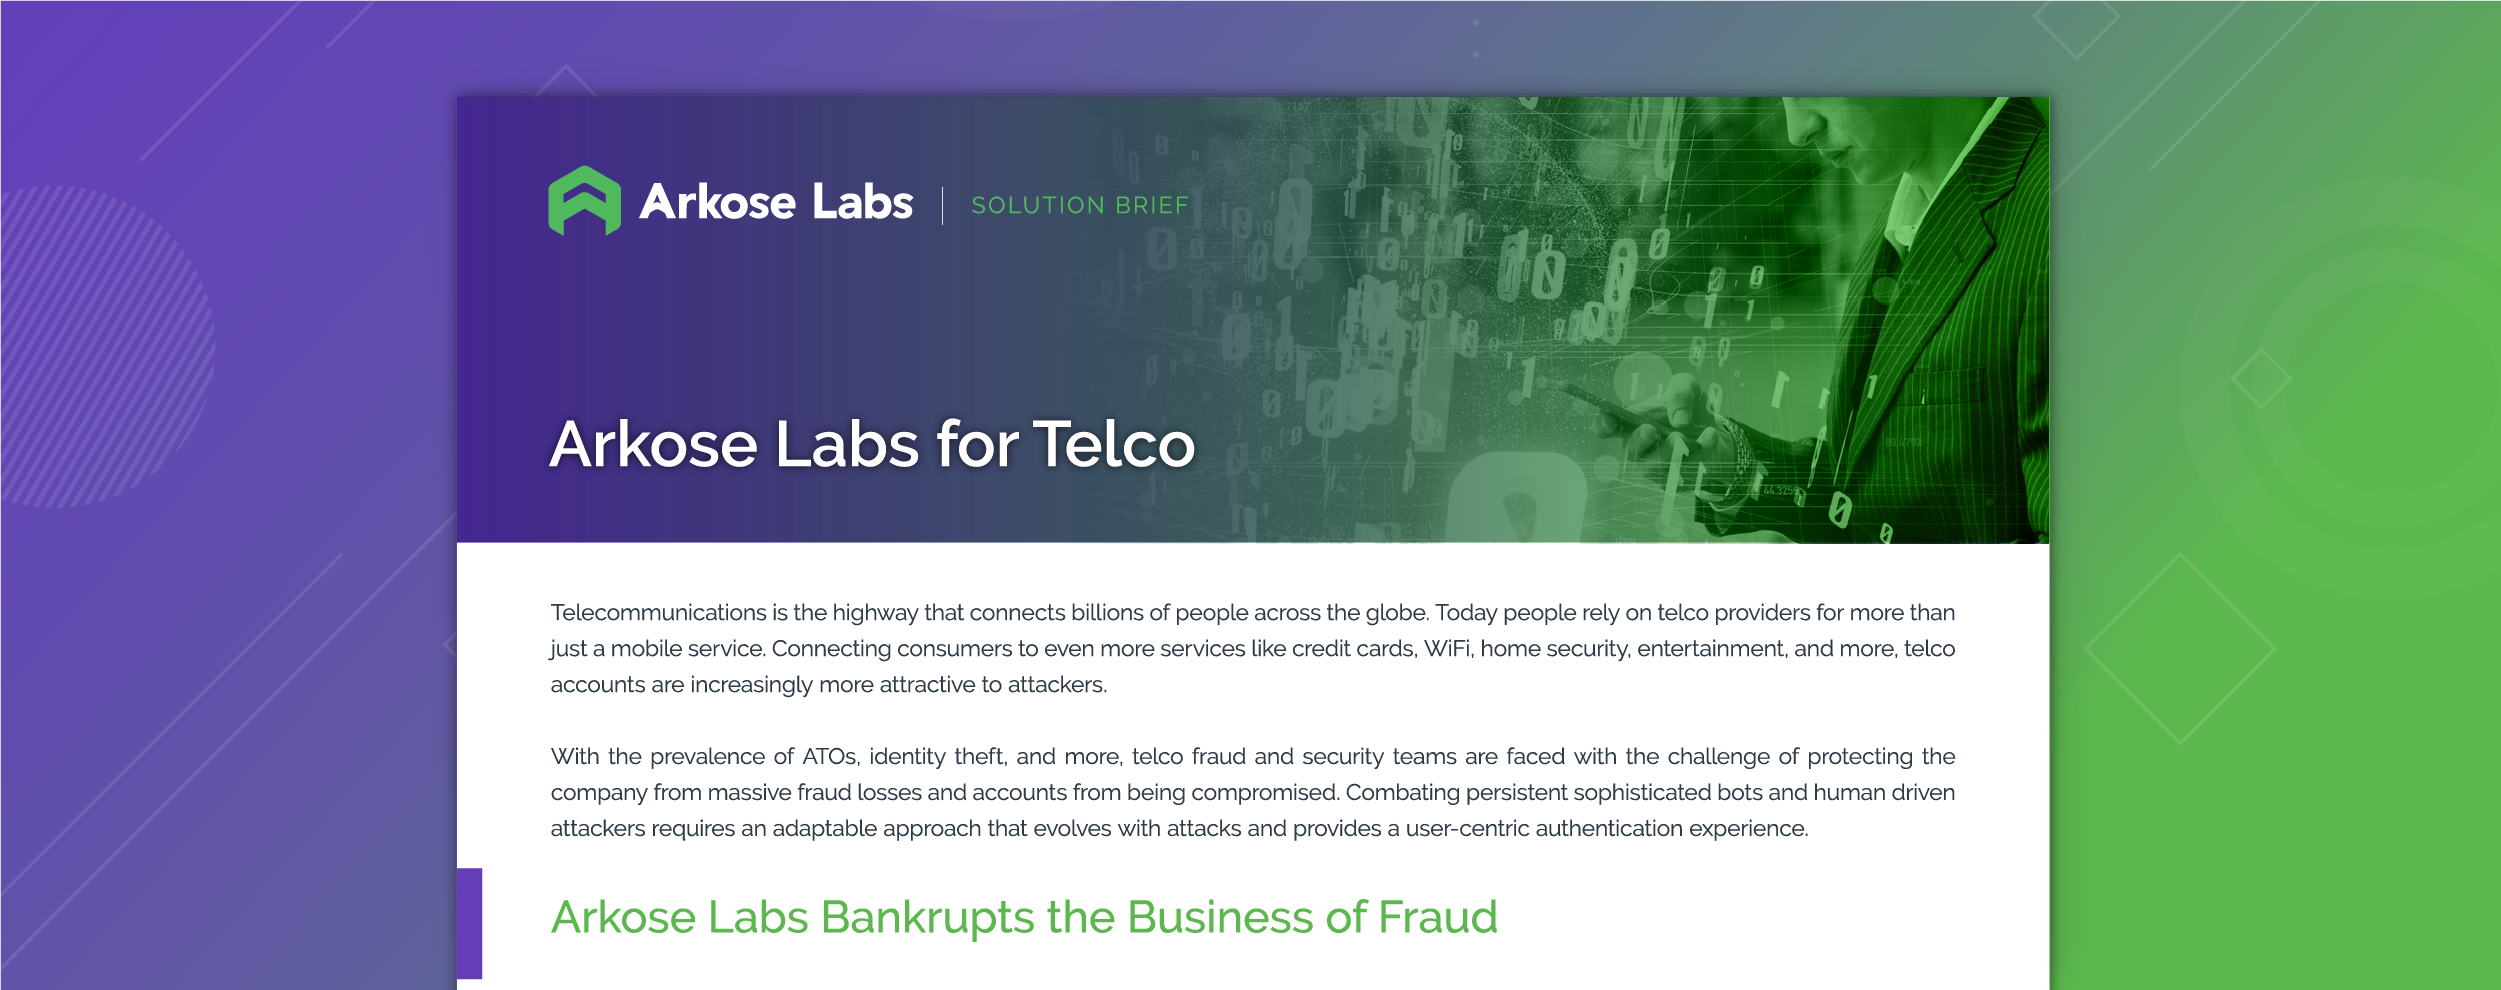 Arkose Labs for Telcos solution brief